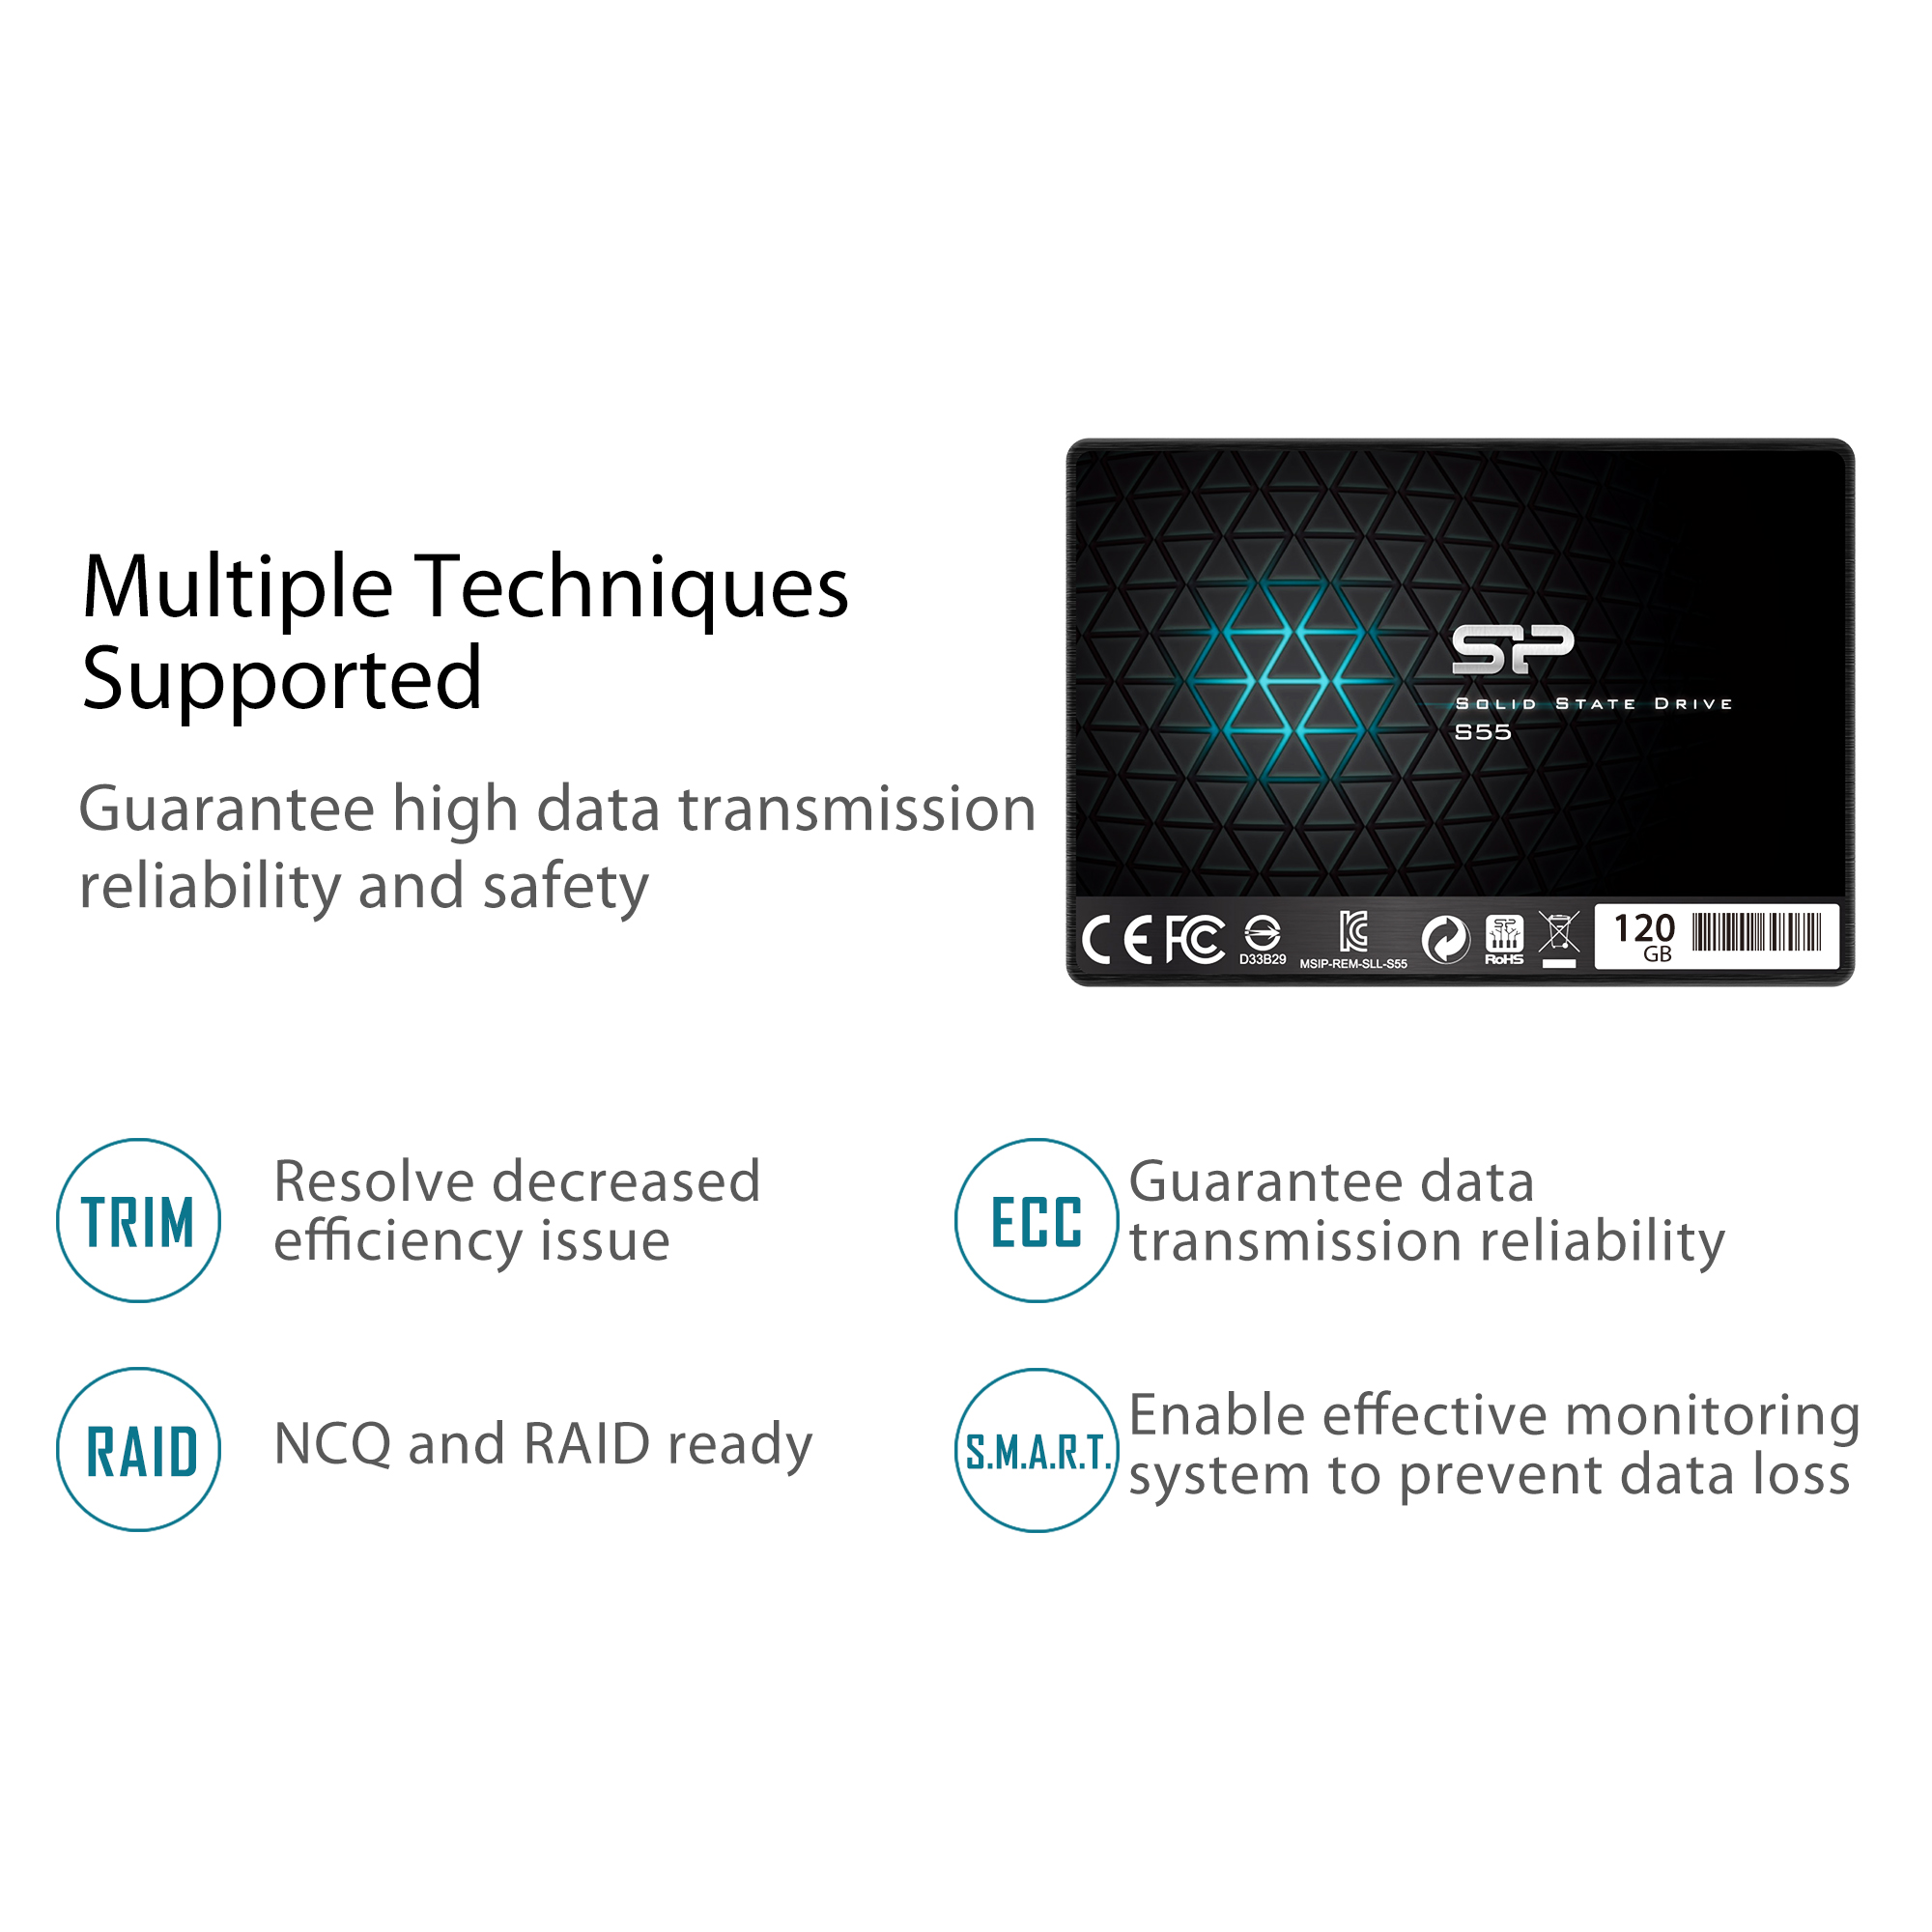 SATA III 2.5 7mm Silicon Power 60GB SSD S55 TLC Internal Solid State Drive- Free-download SSD Health Monitor Tool Included SP060GBSS3S55S25 0.28 SLC Cache Performance Boost 